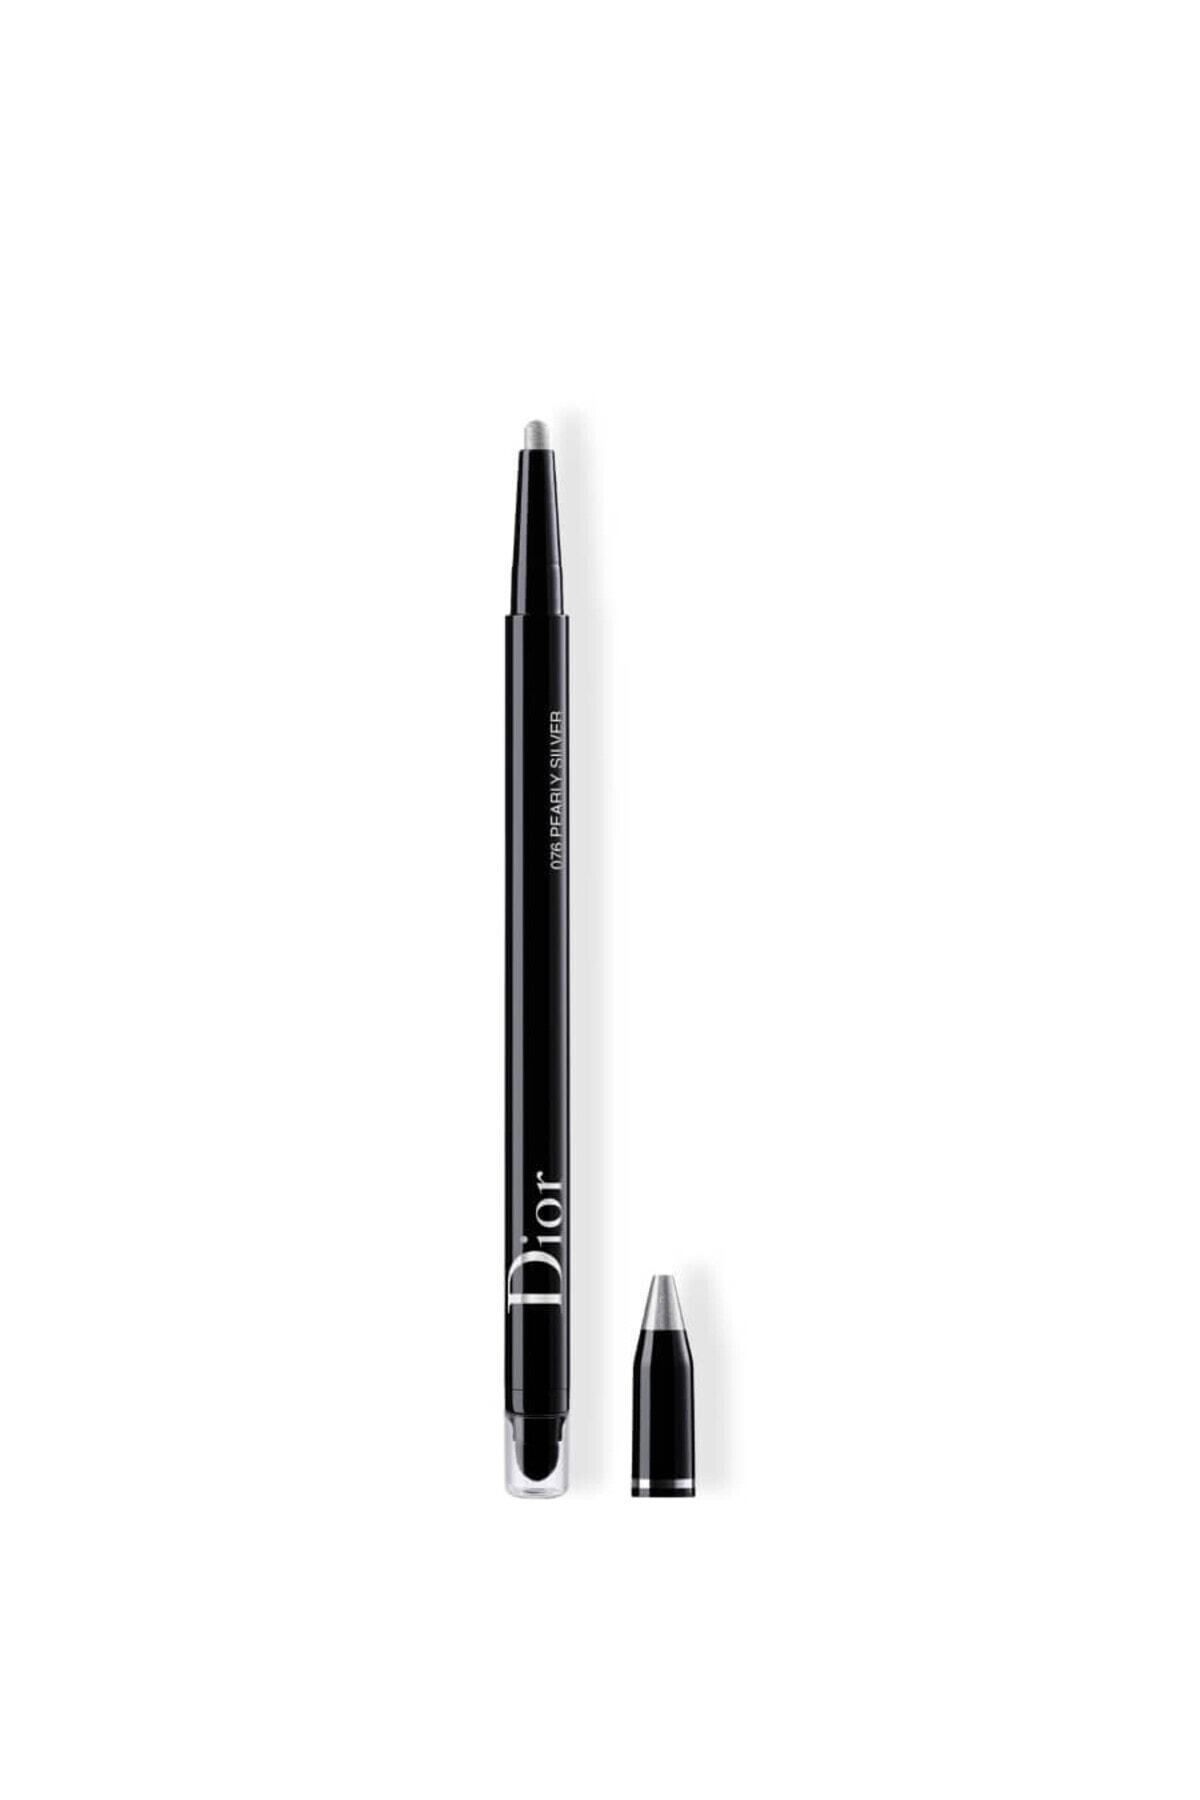 Dior DİORSHOW 24H* STYLO WATERPROOF - 24 HOUR LASTİNG AND HİGH INTENSİTY APPEARANCE EYELİNER PSSN1953